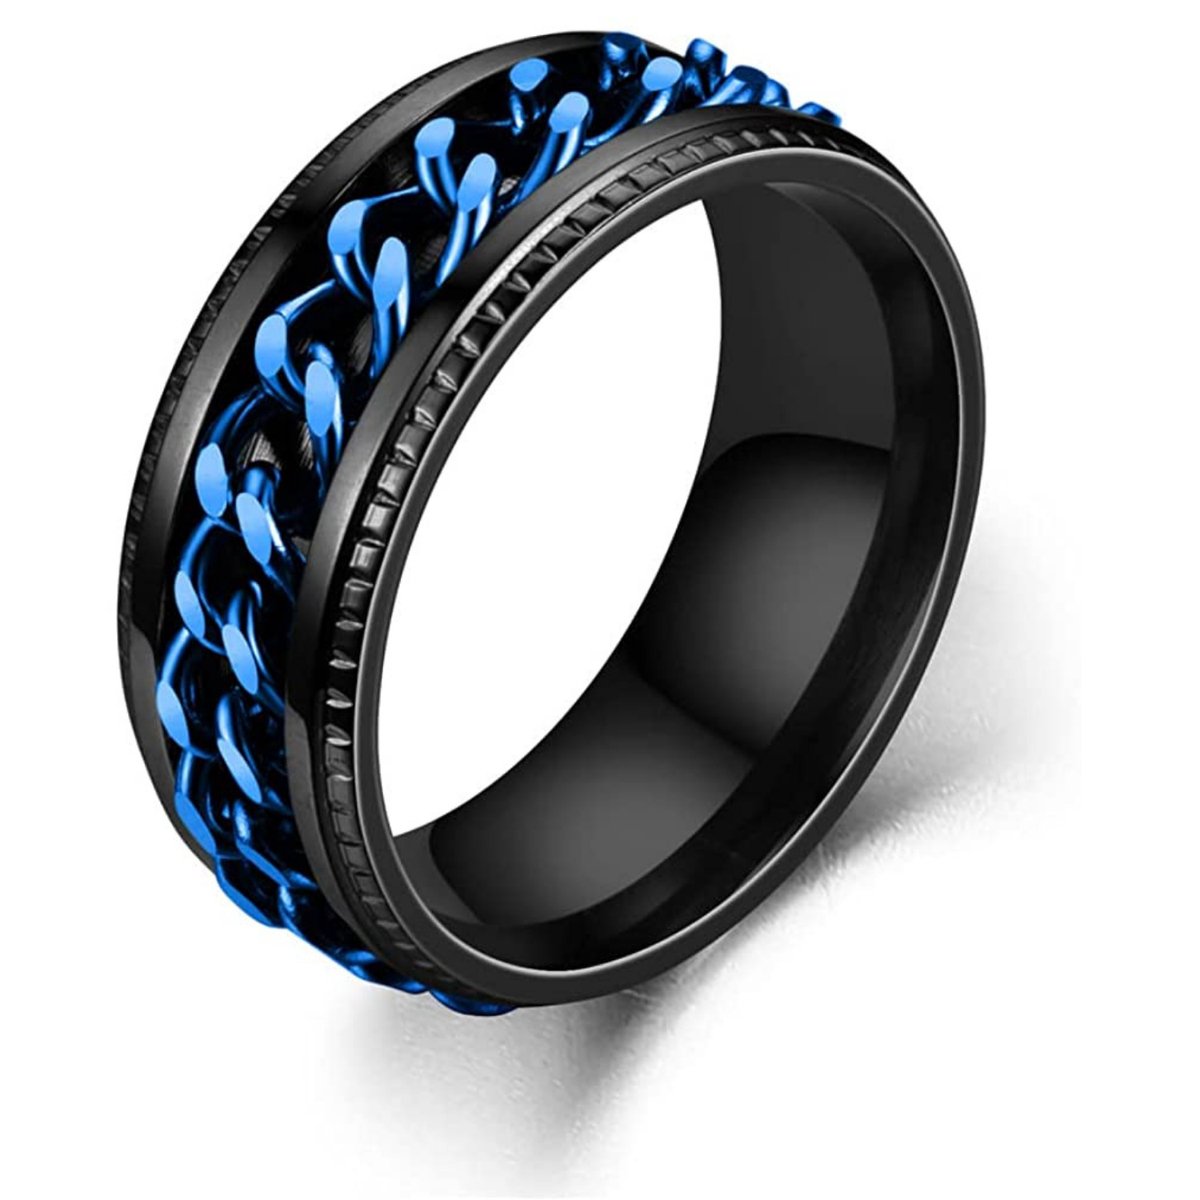 Anxiety Ring - (Ketting) - Stress Ring - Fidget Ring - Anxiety Ring For Finger - Draaibare Ring - Angst Ring - Zwart-Blauw - (23.25mm / maat 73)